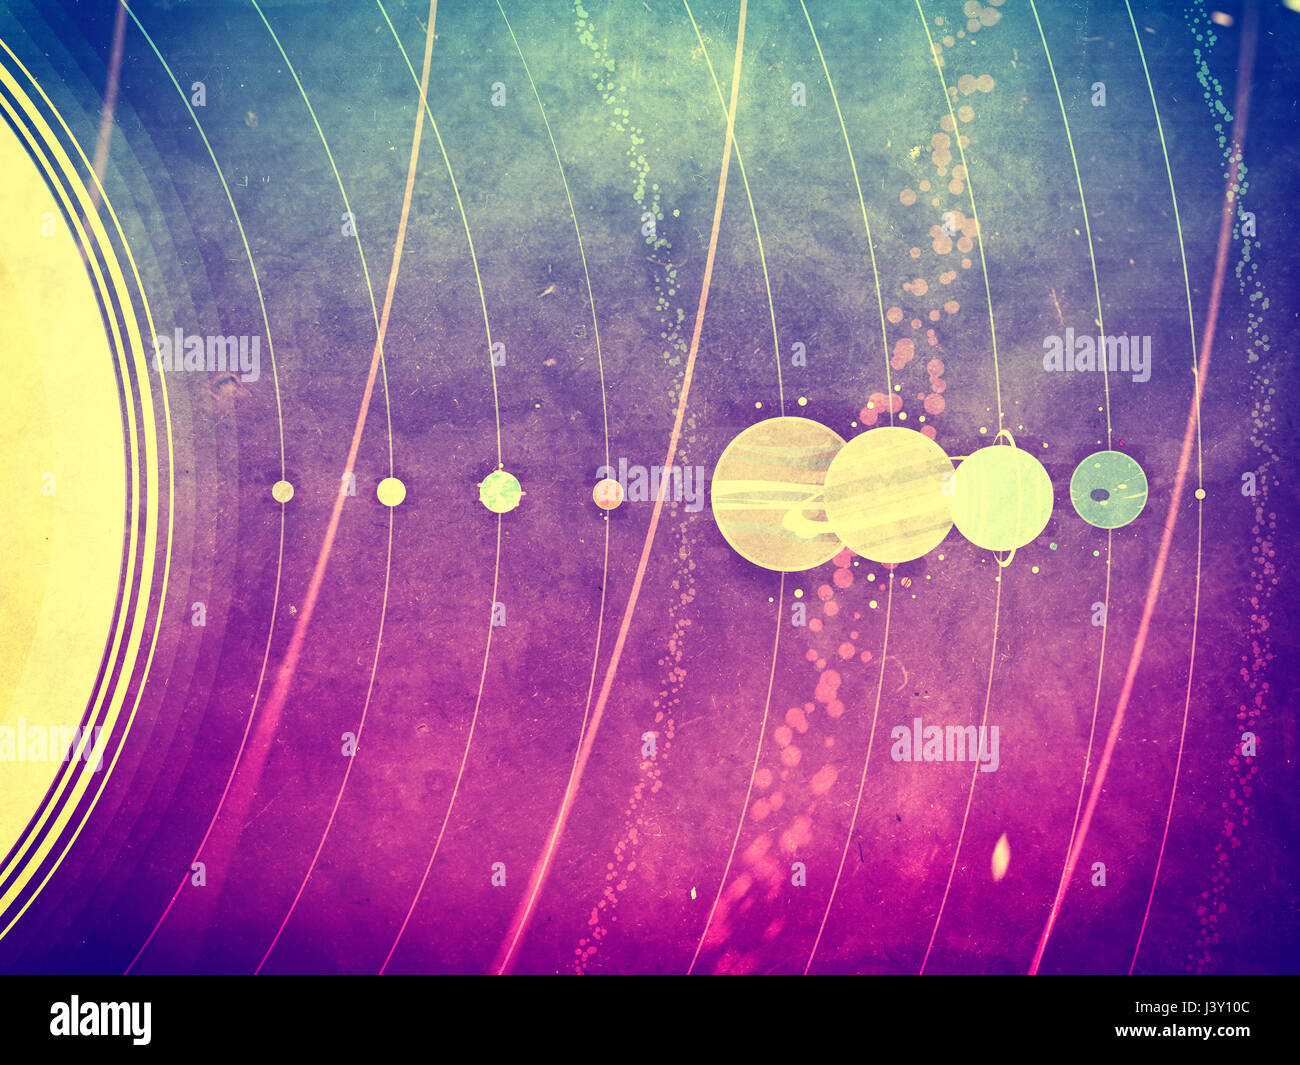 Solar system - planets, comet, satellite of the planets flat textured illustration with comparative dimensions Stock Photo